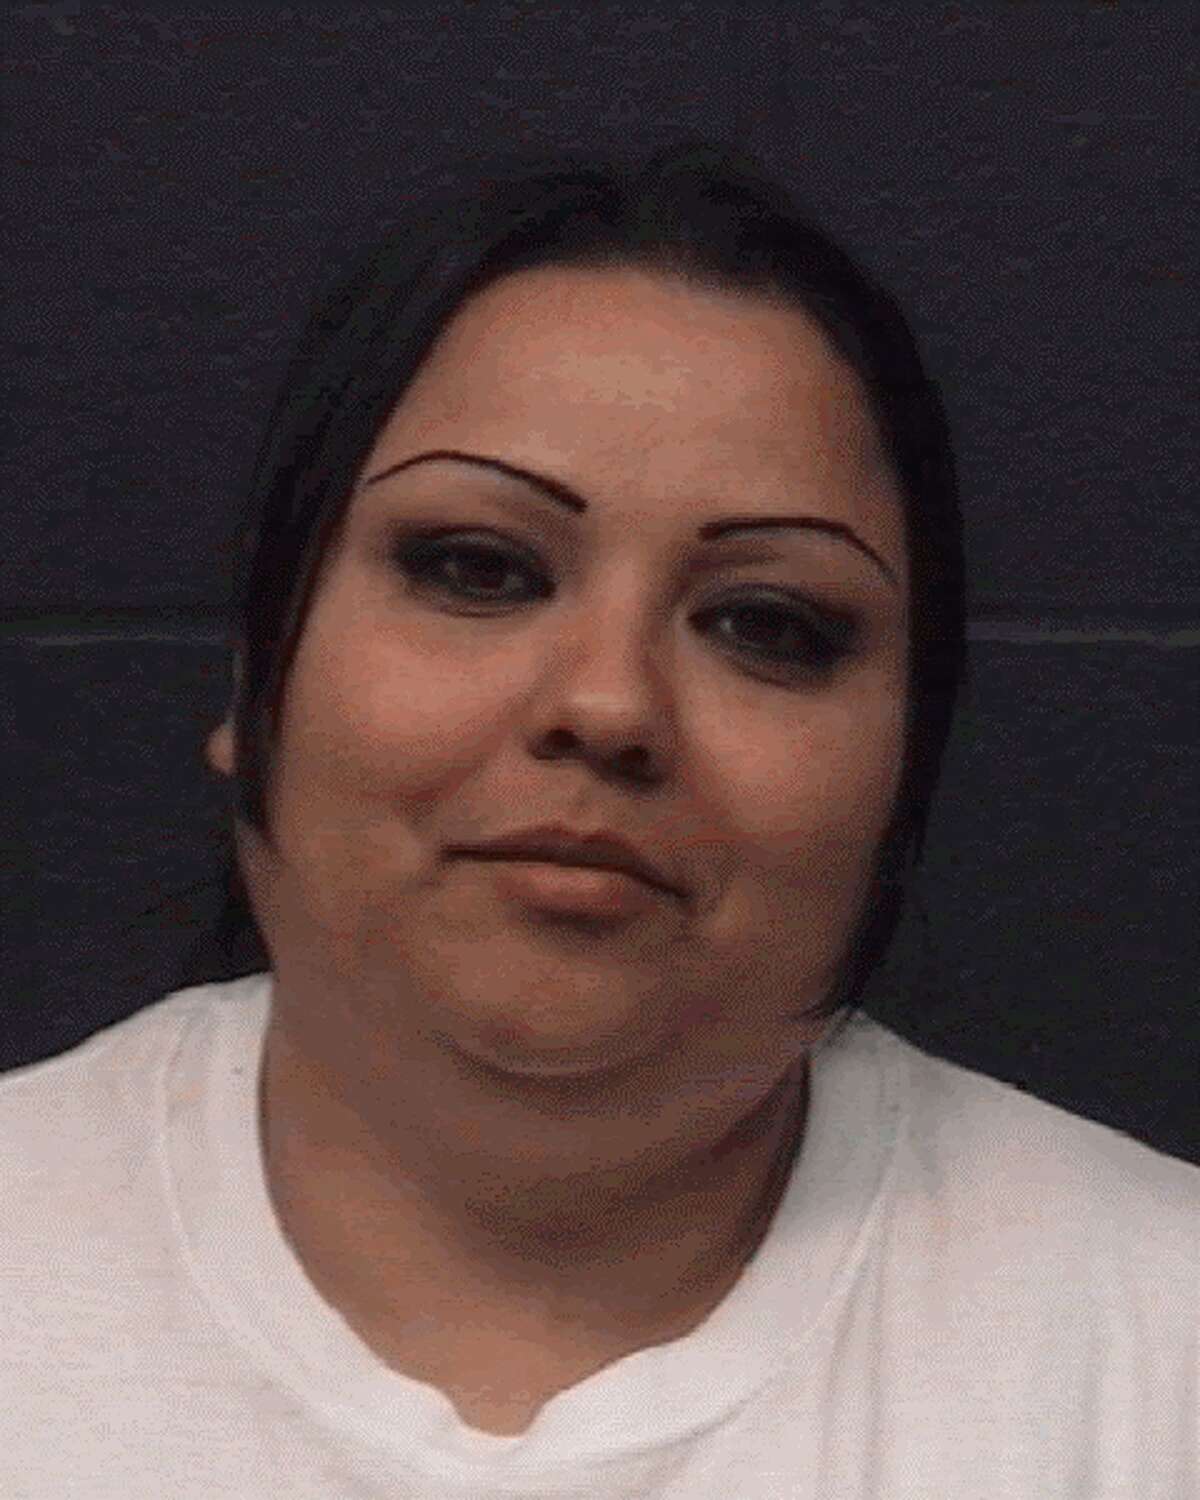 ROCHA, FRANCISCA (W F) (33) years of age was arrested on the charge of THEFT PROP>=$100